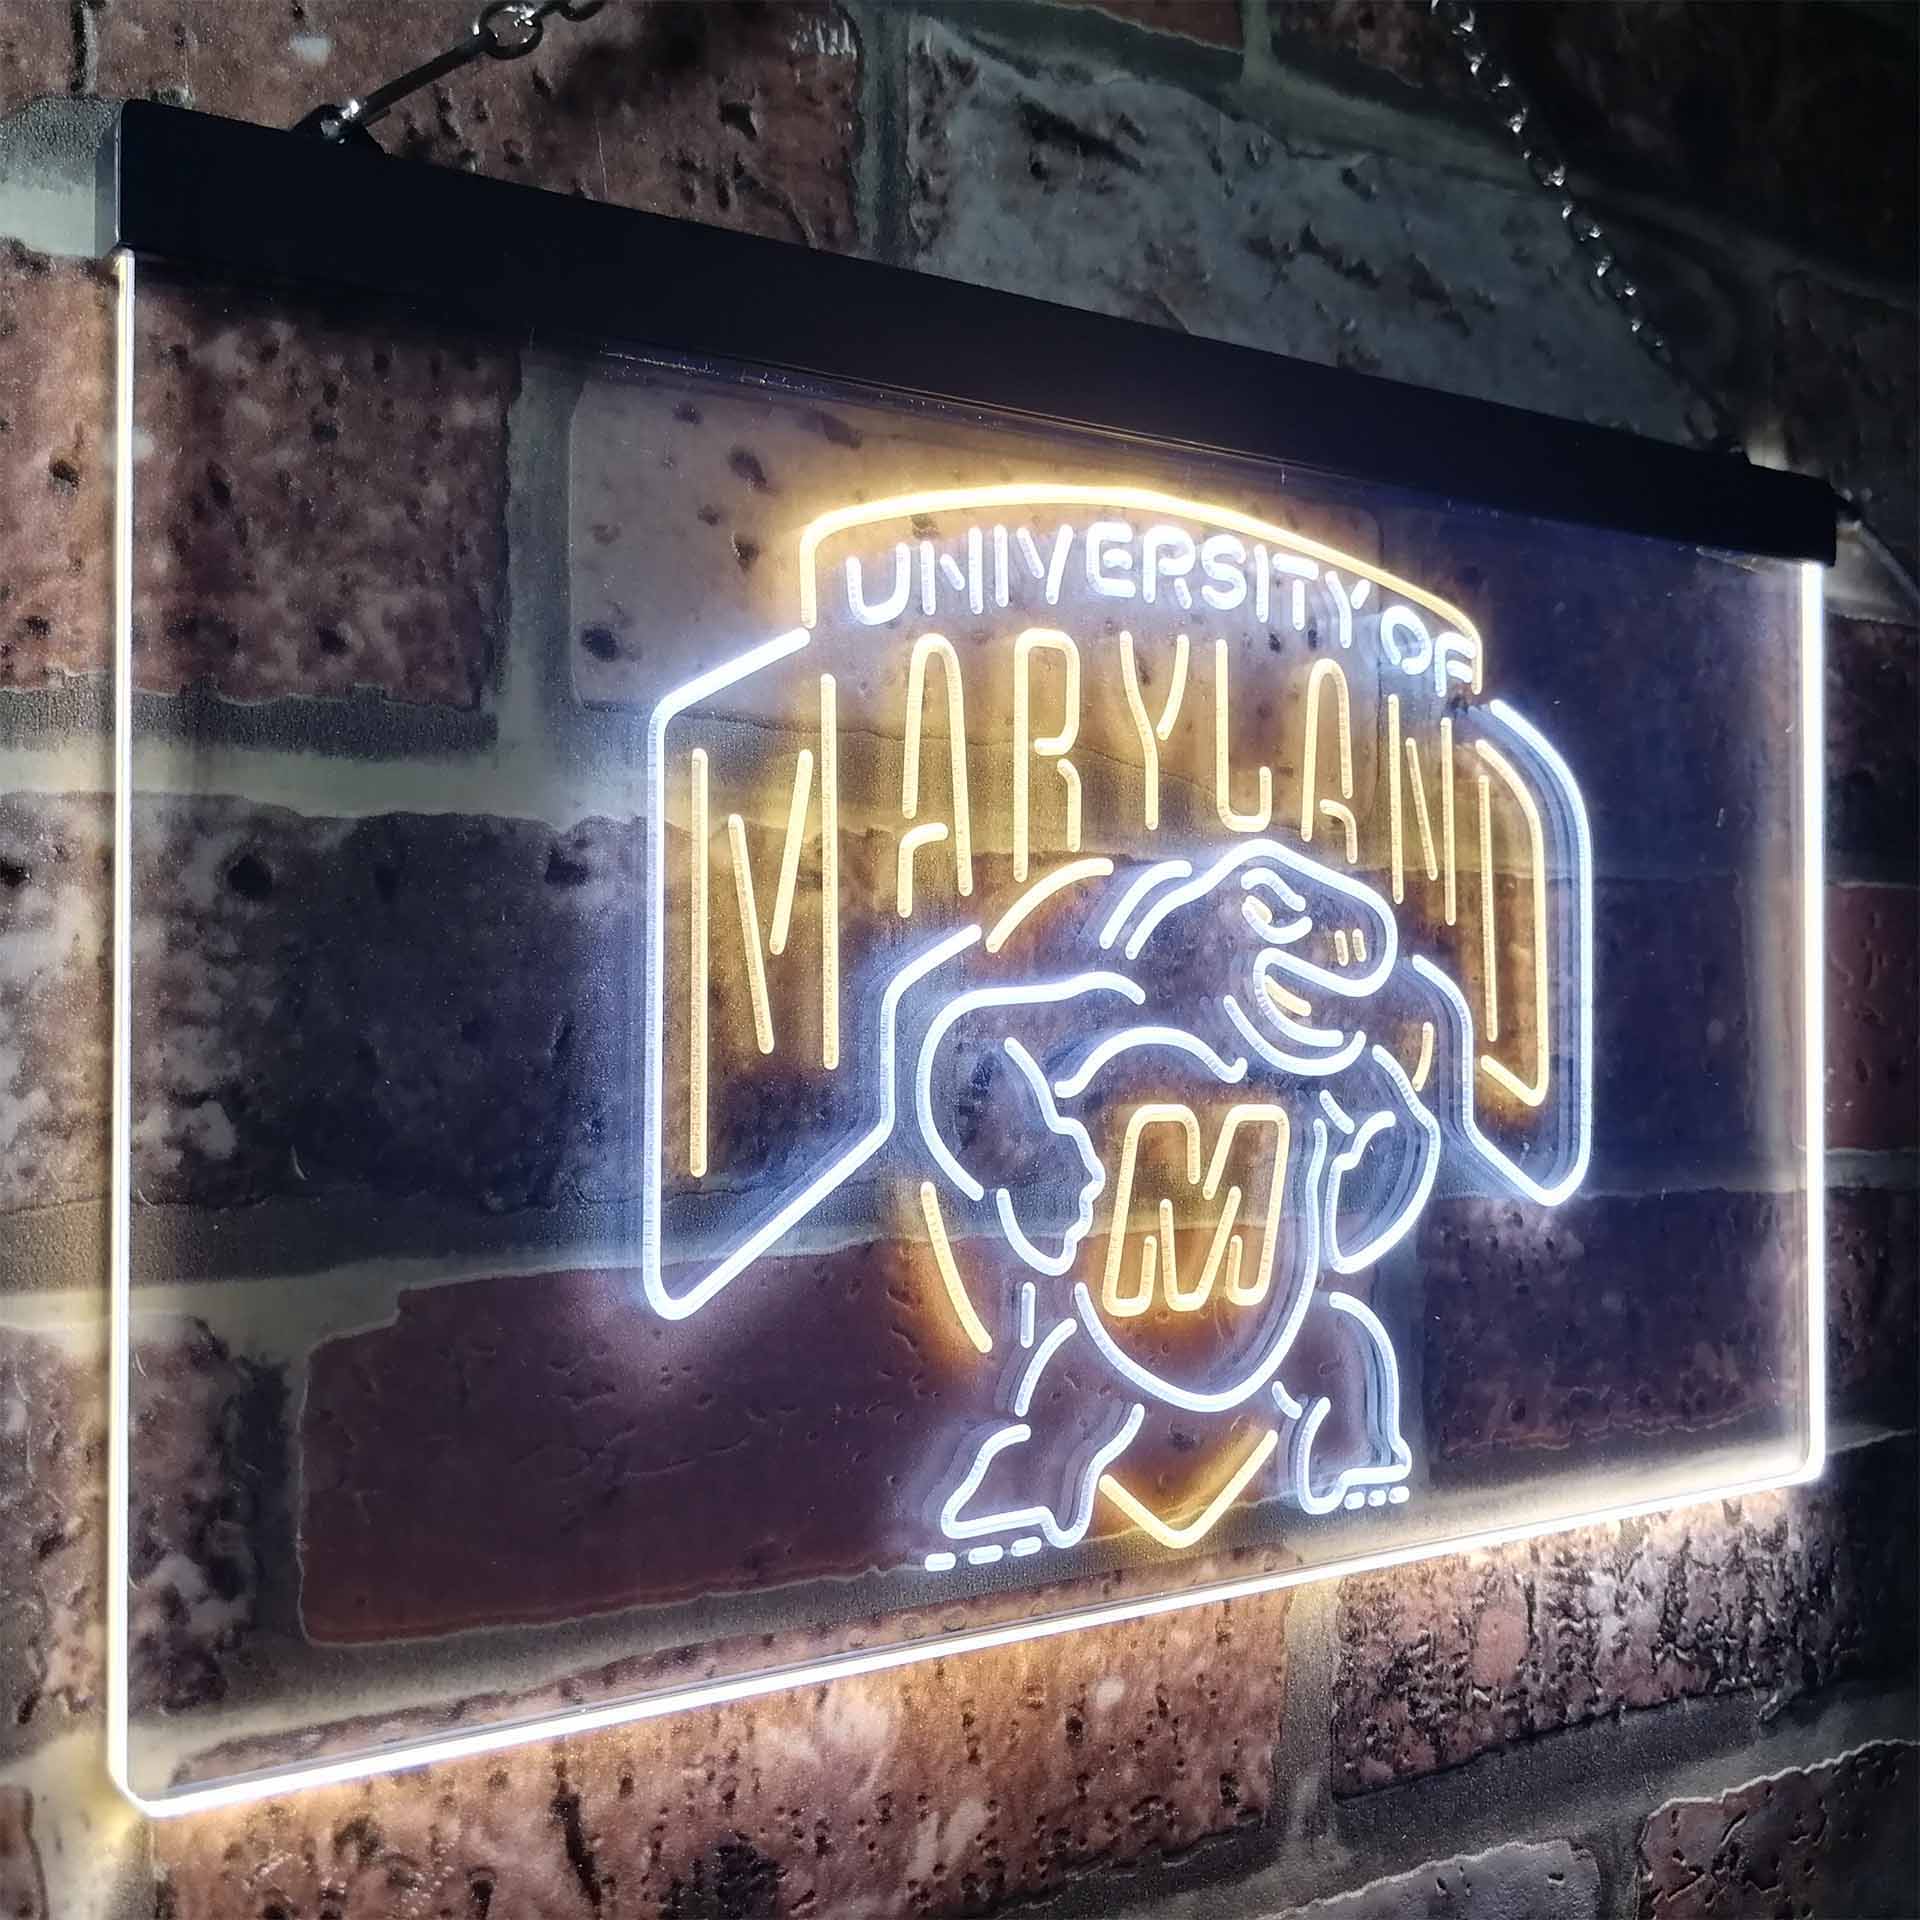 University of Maryland Terrapins Neon LED Sign